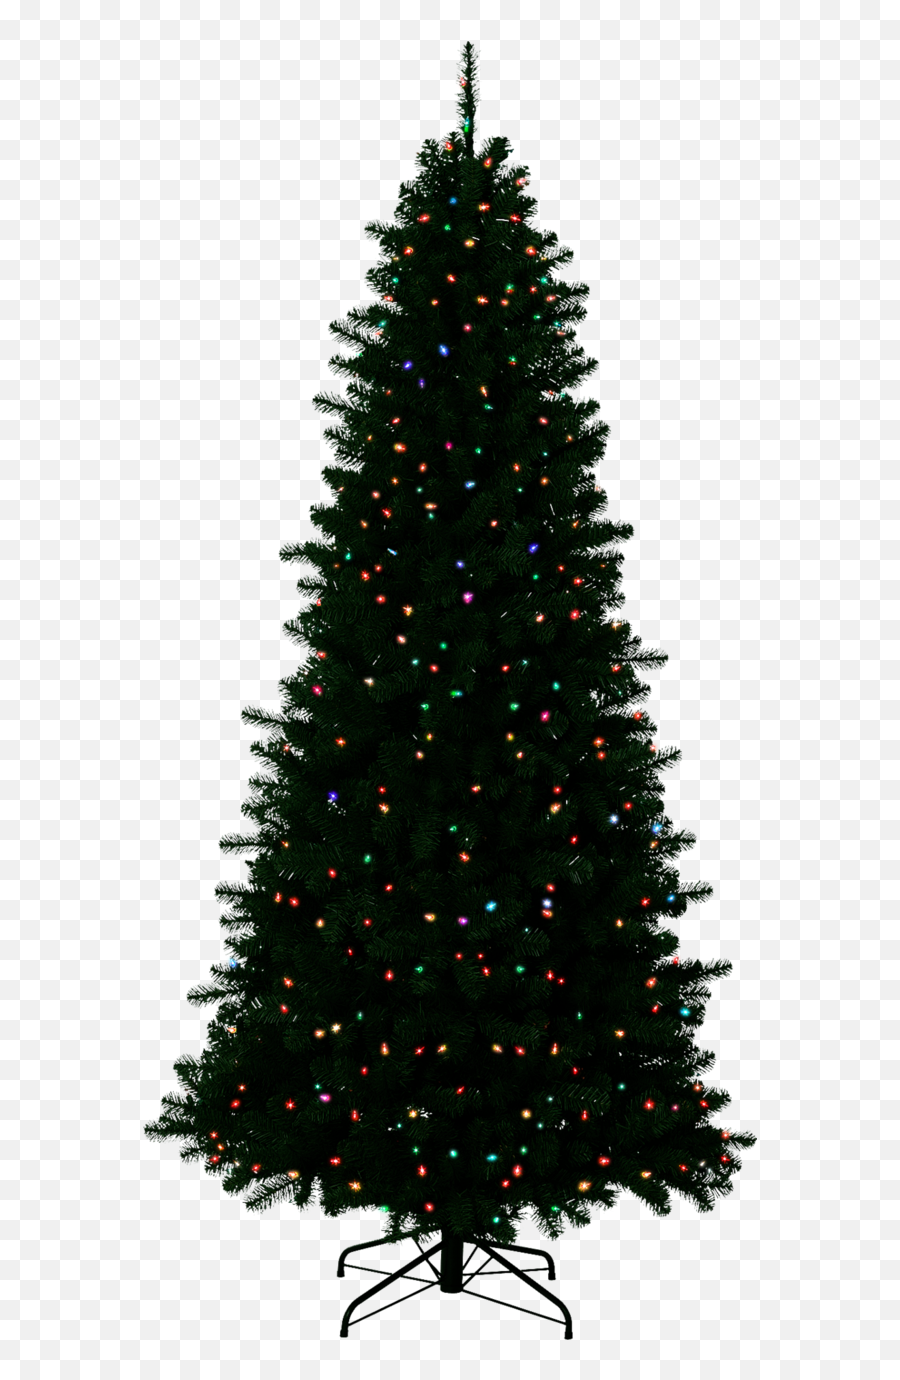 Transparent Background Hq Png Image - Christmas Tree With No Decorations,Christmas Backgrounds Png